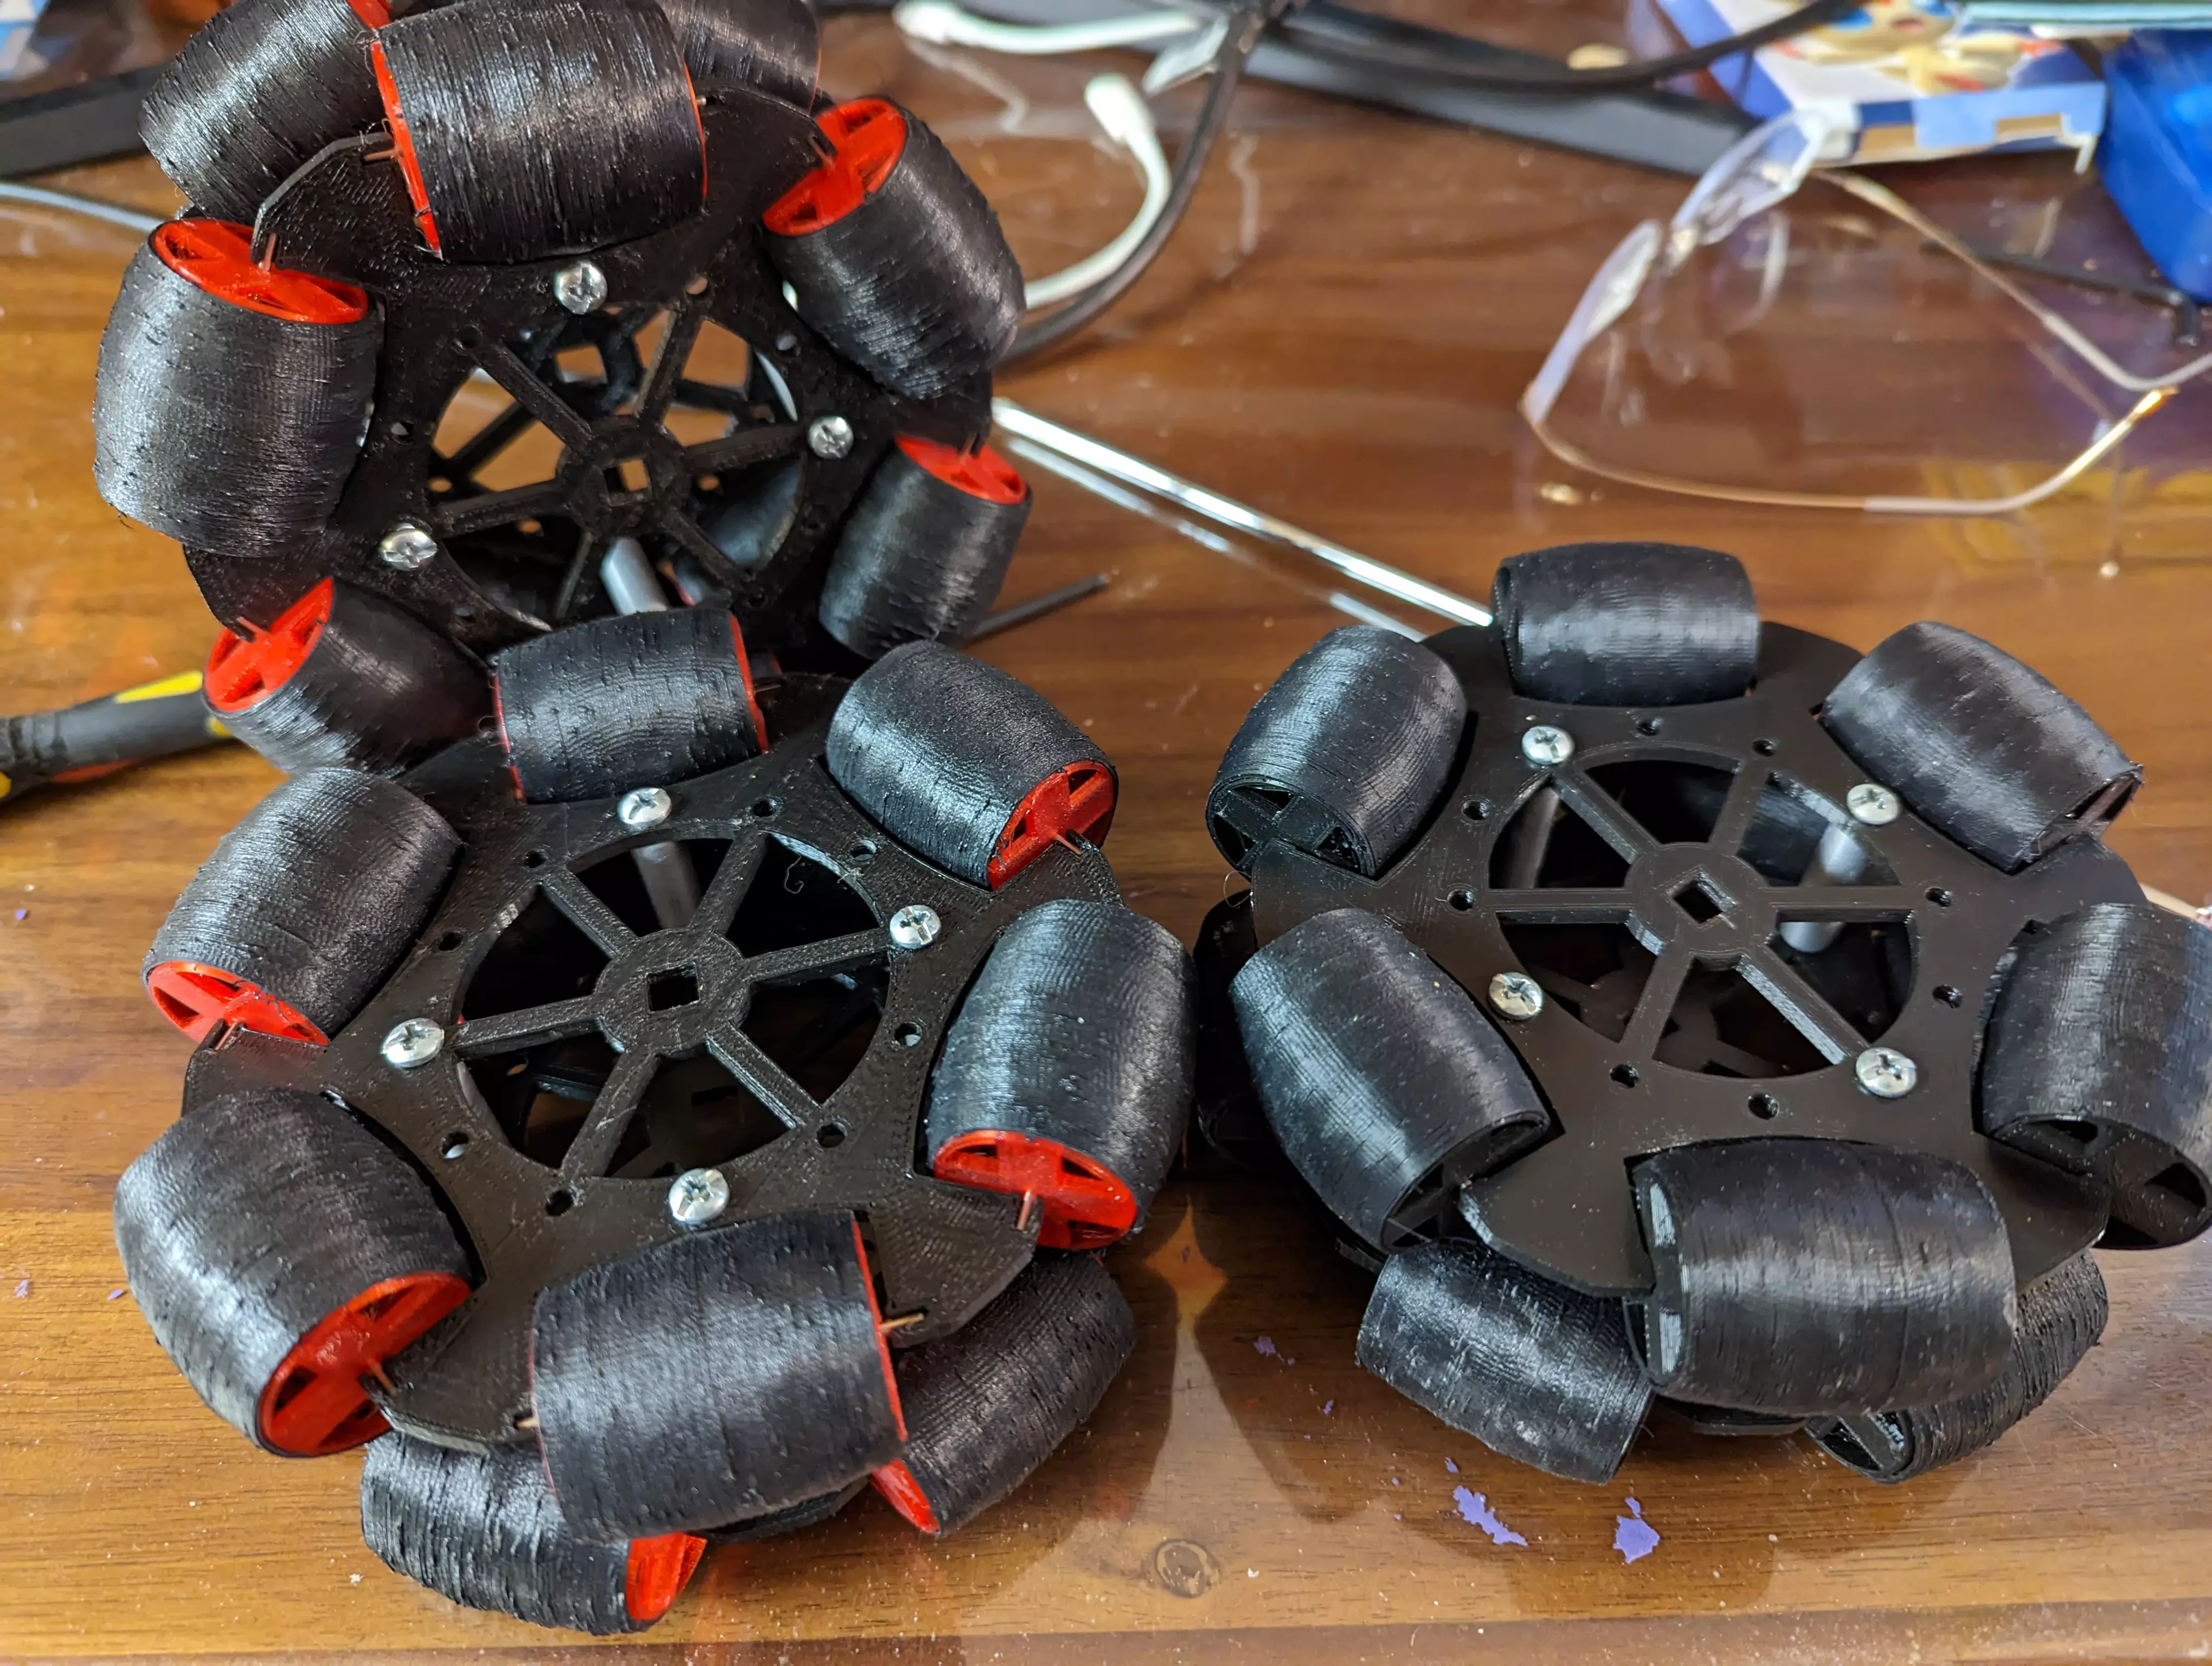 A 3D-printed deprecated omni-wheel with TPU-jacketed rollers